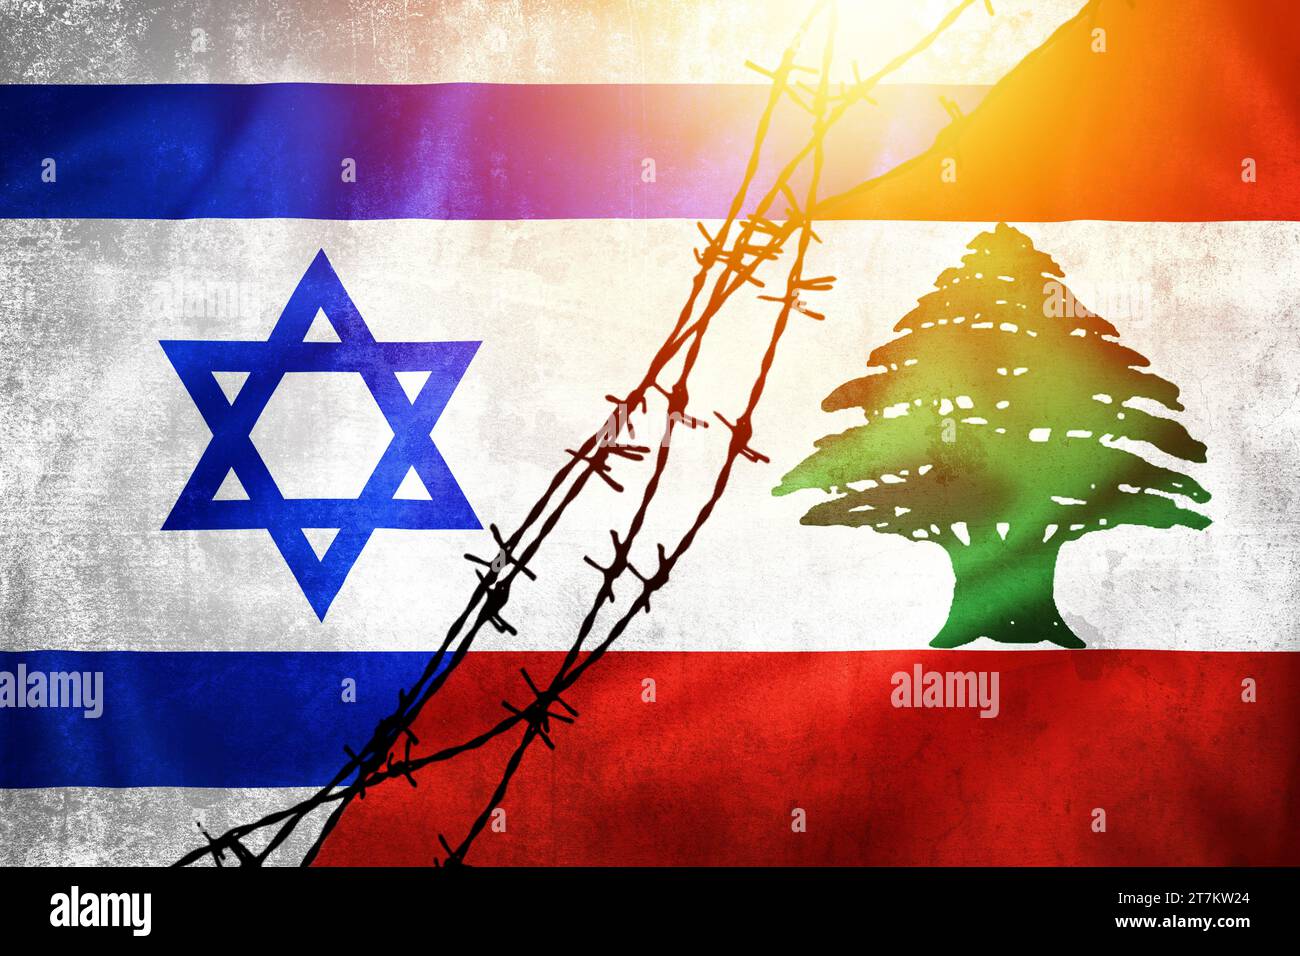 Grunge flags of Israel and Lebanon divided by barb wire sun haze illustration, concept of tense relations between Israel and Middle east states Stock Photo